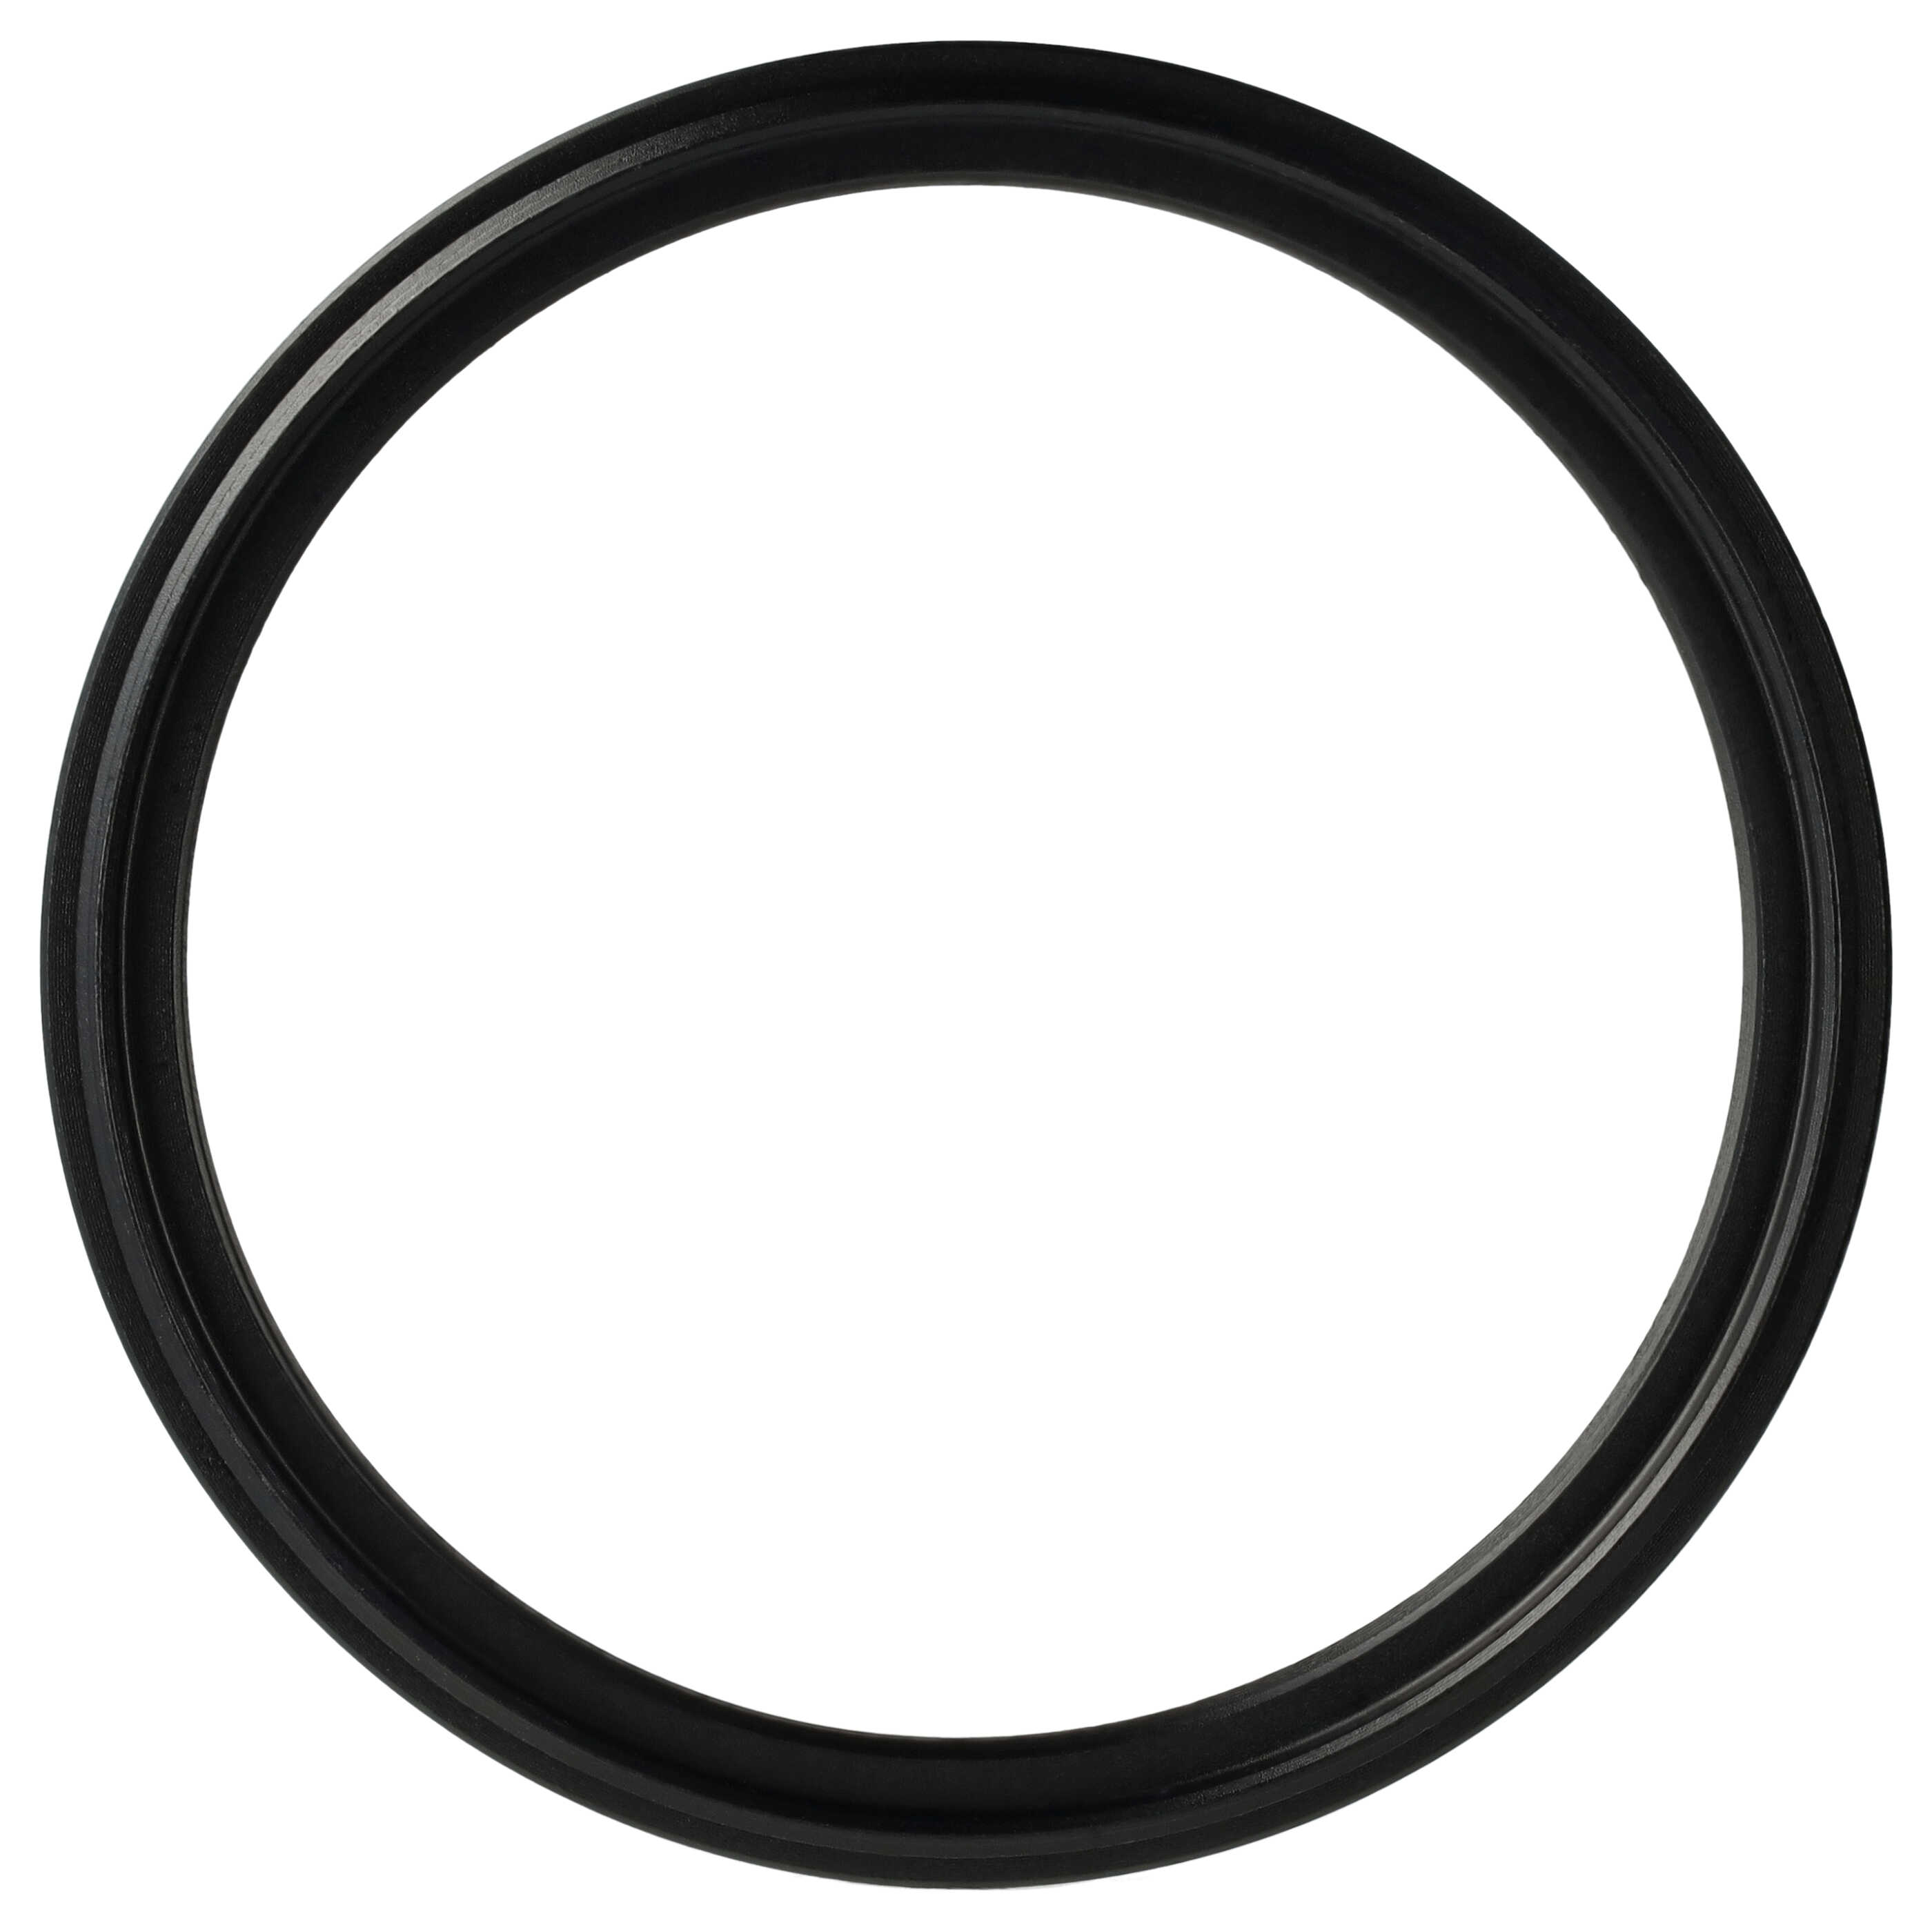 Step-Down Ring Adapter from 62 mm to 55 mm suitable for Camera Lens - Filter Adapter, metal